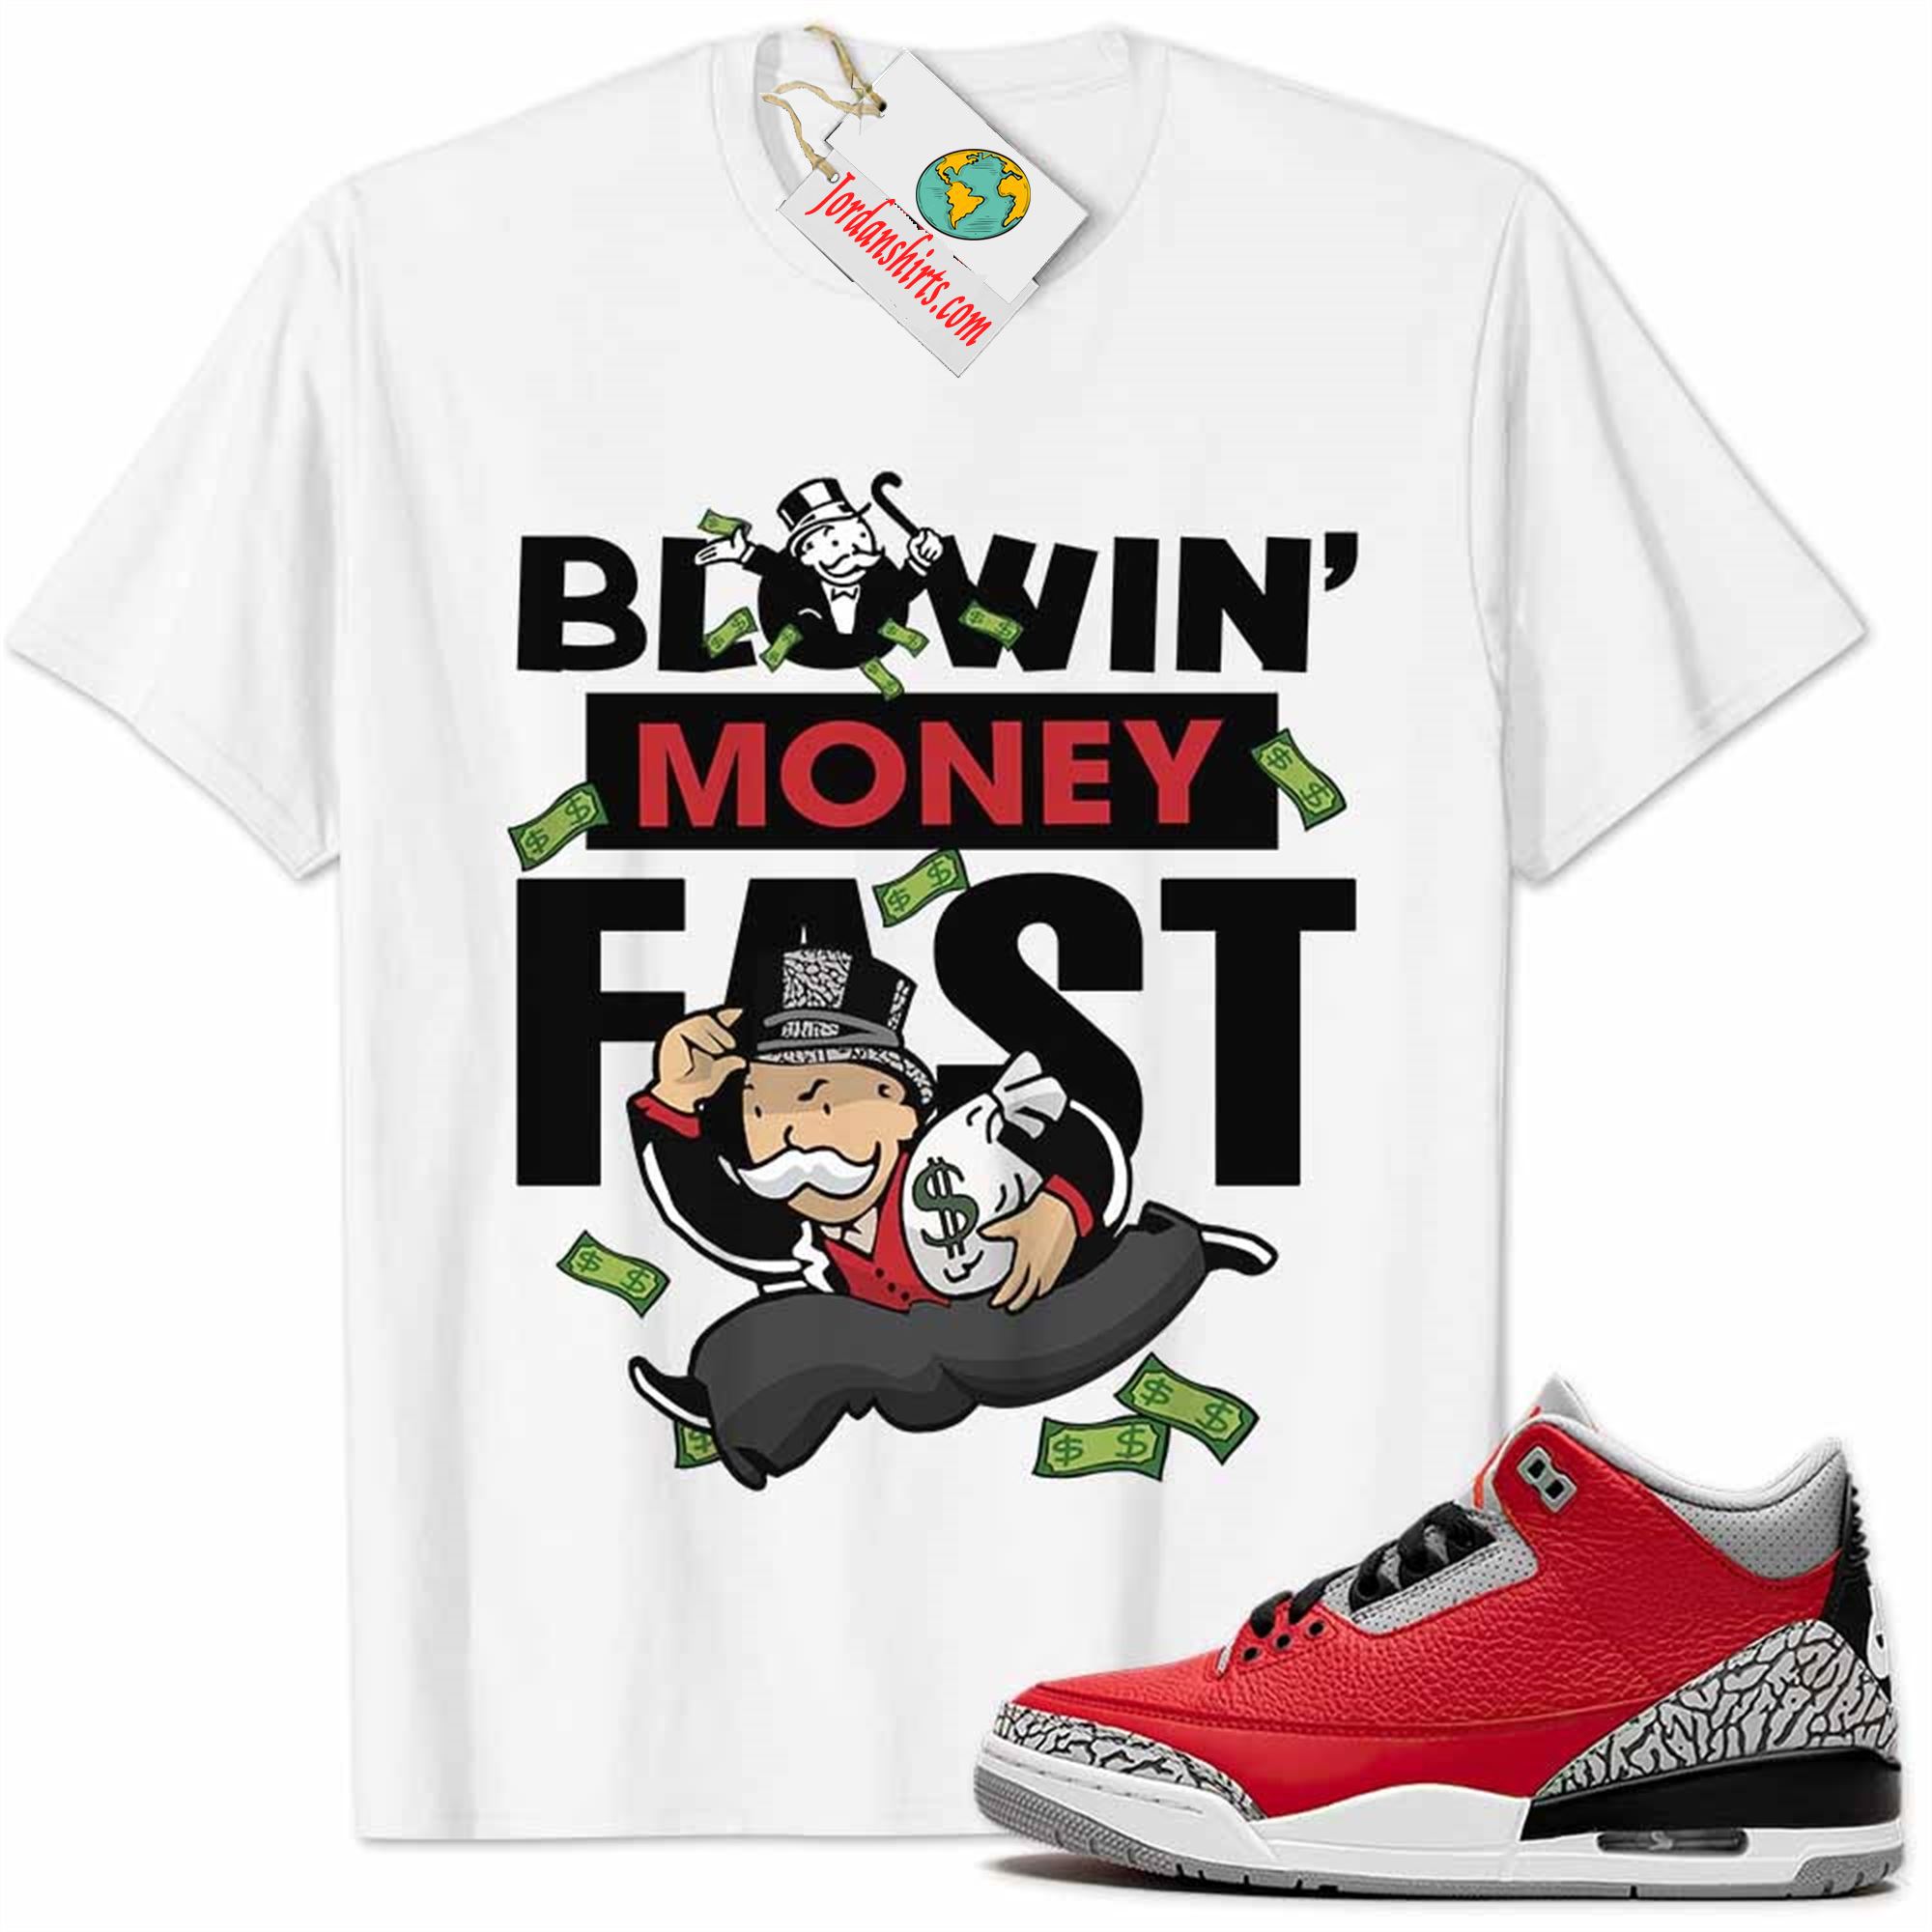 Jordan 3 Shirt, Cement 3s Shirt Blowin Money Fast Mr Monopoly White Full Size Up To 5xl